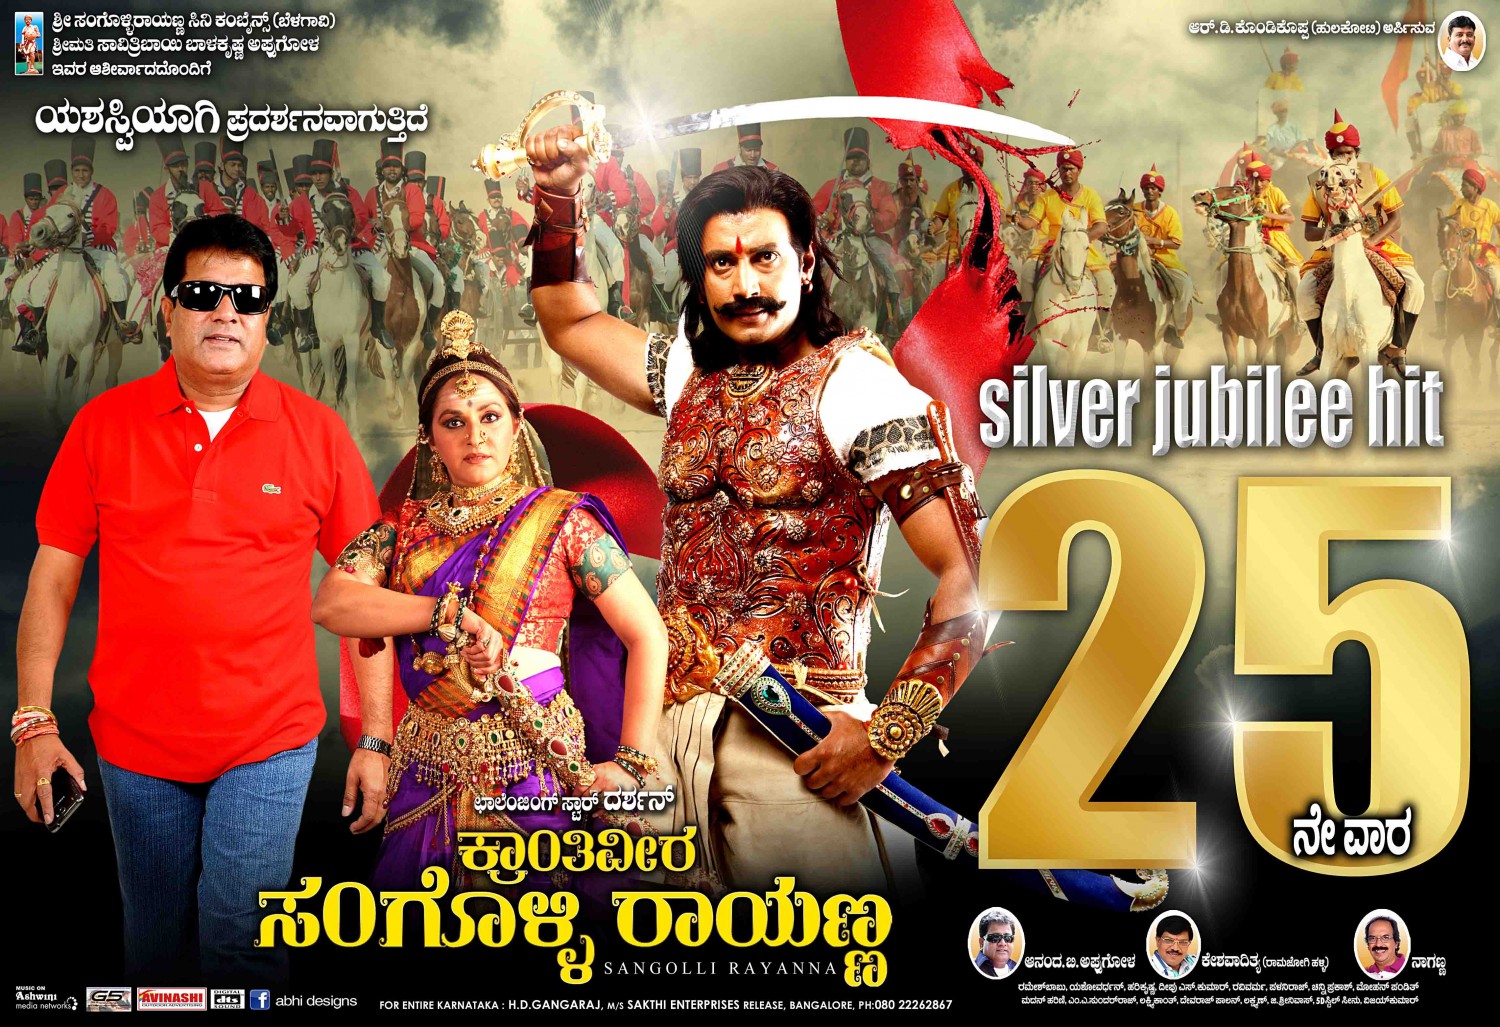 Extra Large Movie Poster Image for Sangolli Rayanna (#71 of 79)